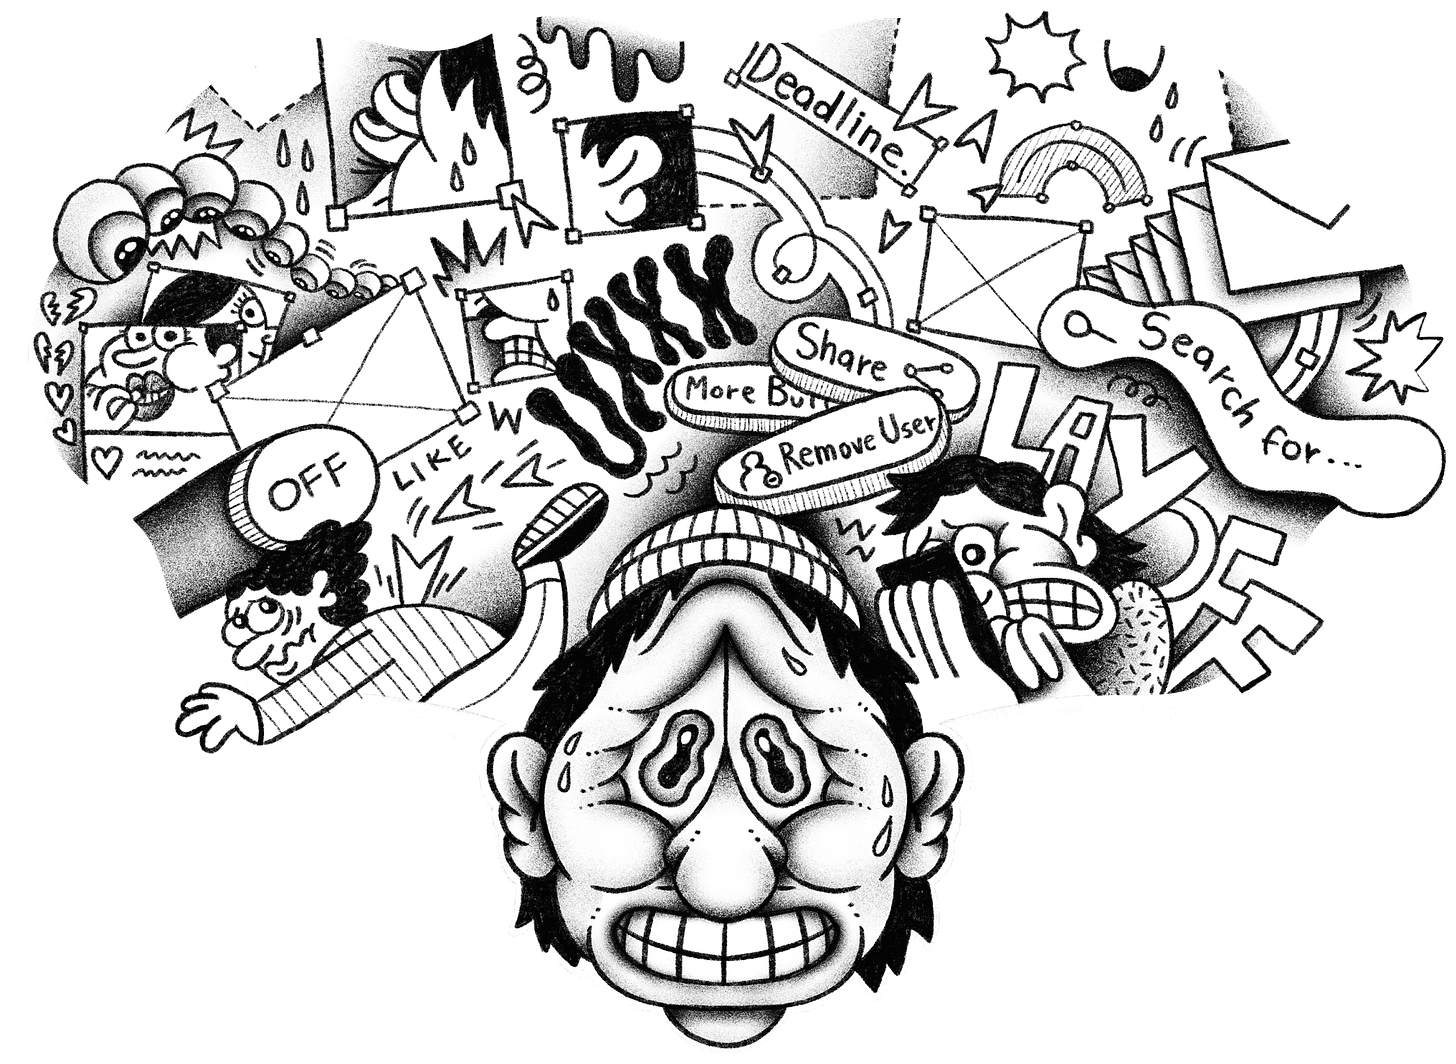 A human head surrounded by scary thoughts represented by cartoon characters, design patterns, and keywords such as “deadline" and “layoffs”. The person looks worried.